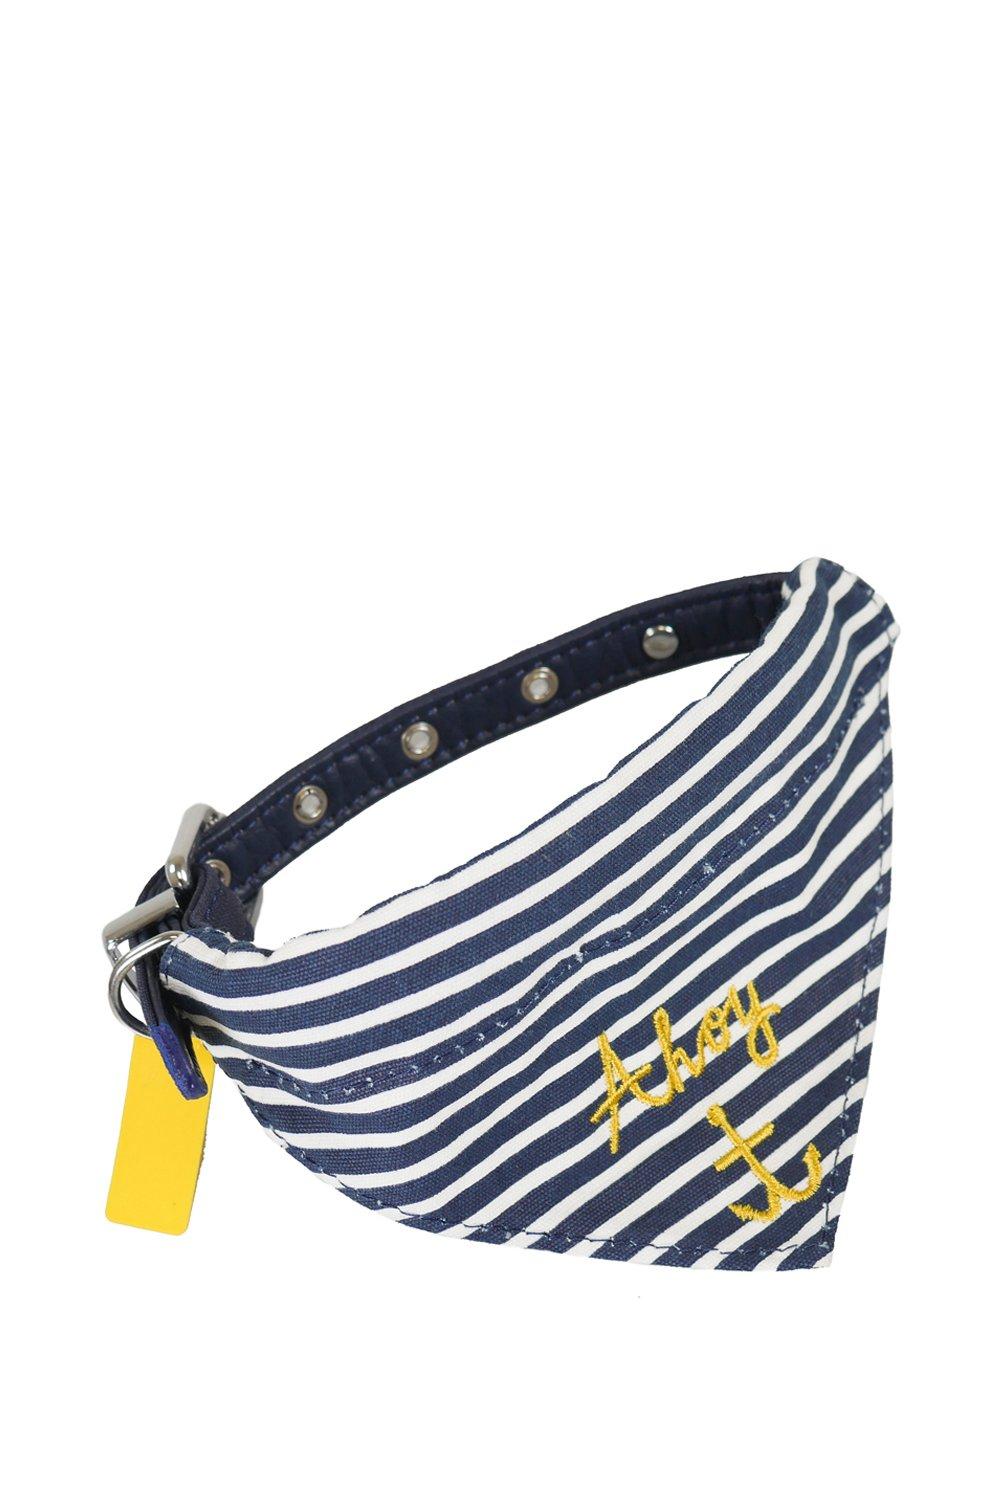 Picture of Ahoy There! Nautical Collar & Neckerchief Small